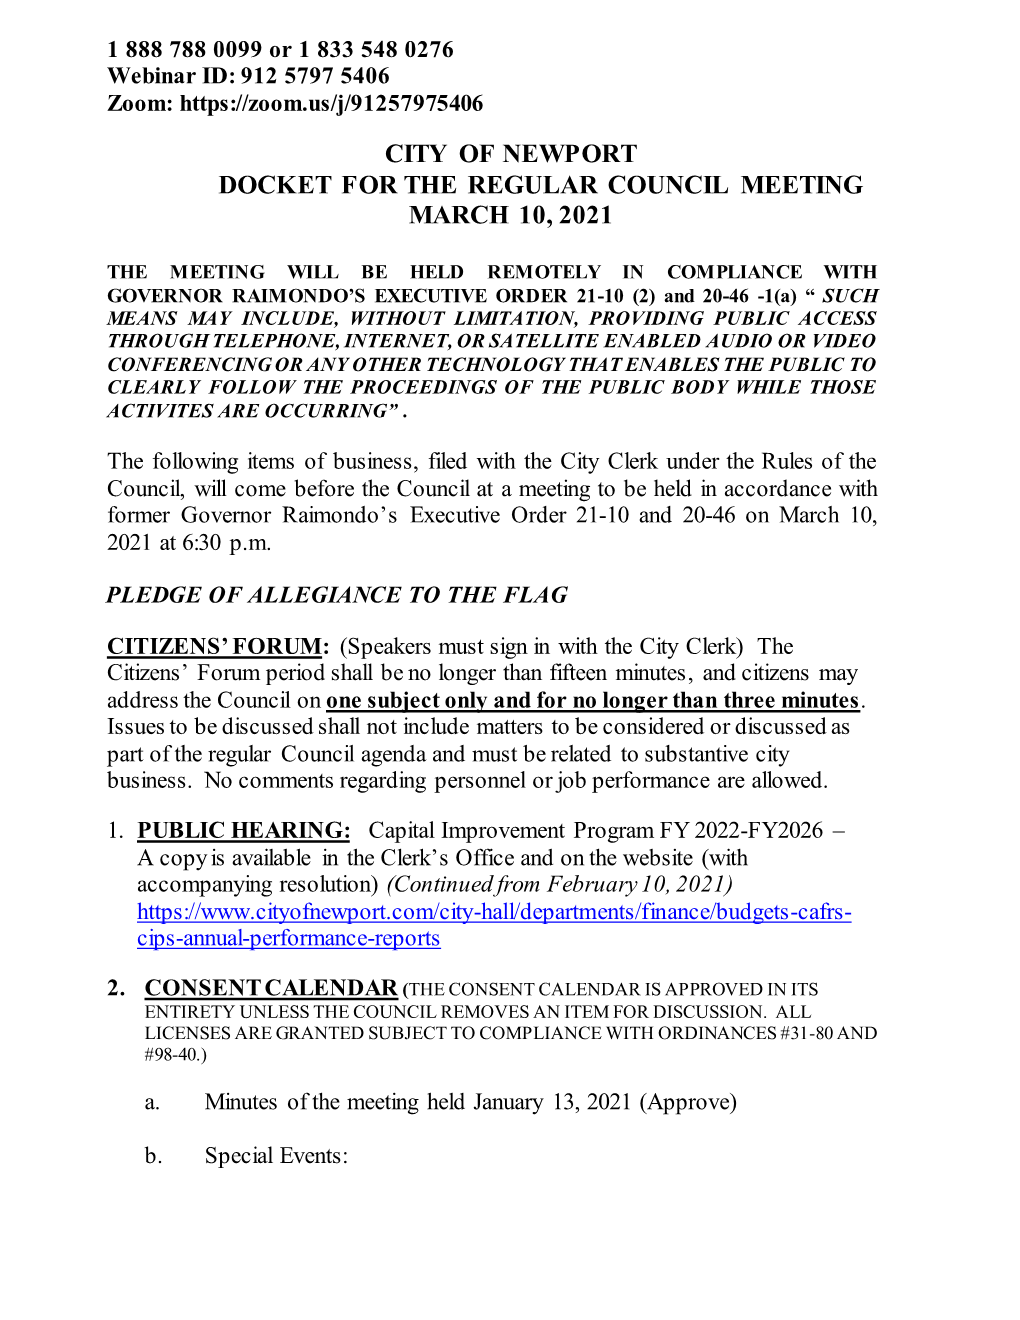 City of Newport Docket for the Regular Council Meeting March 10, 2021